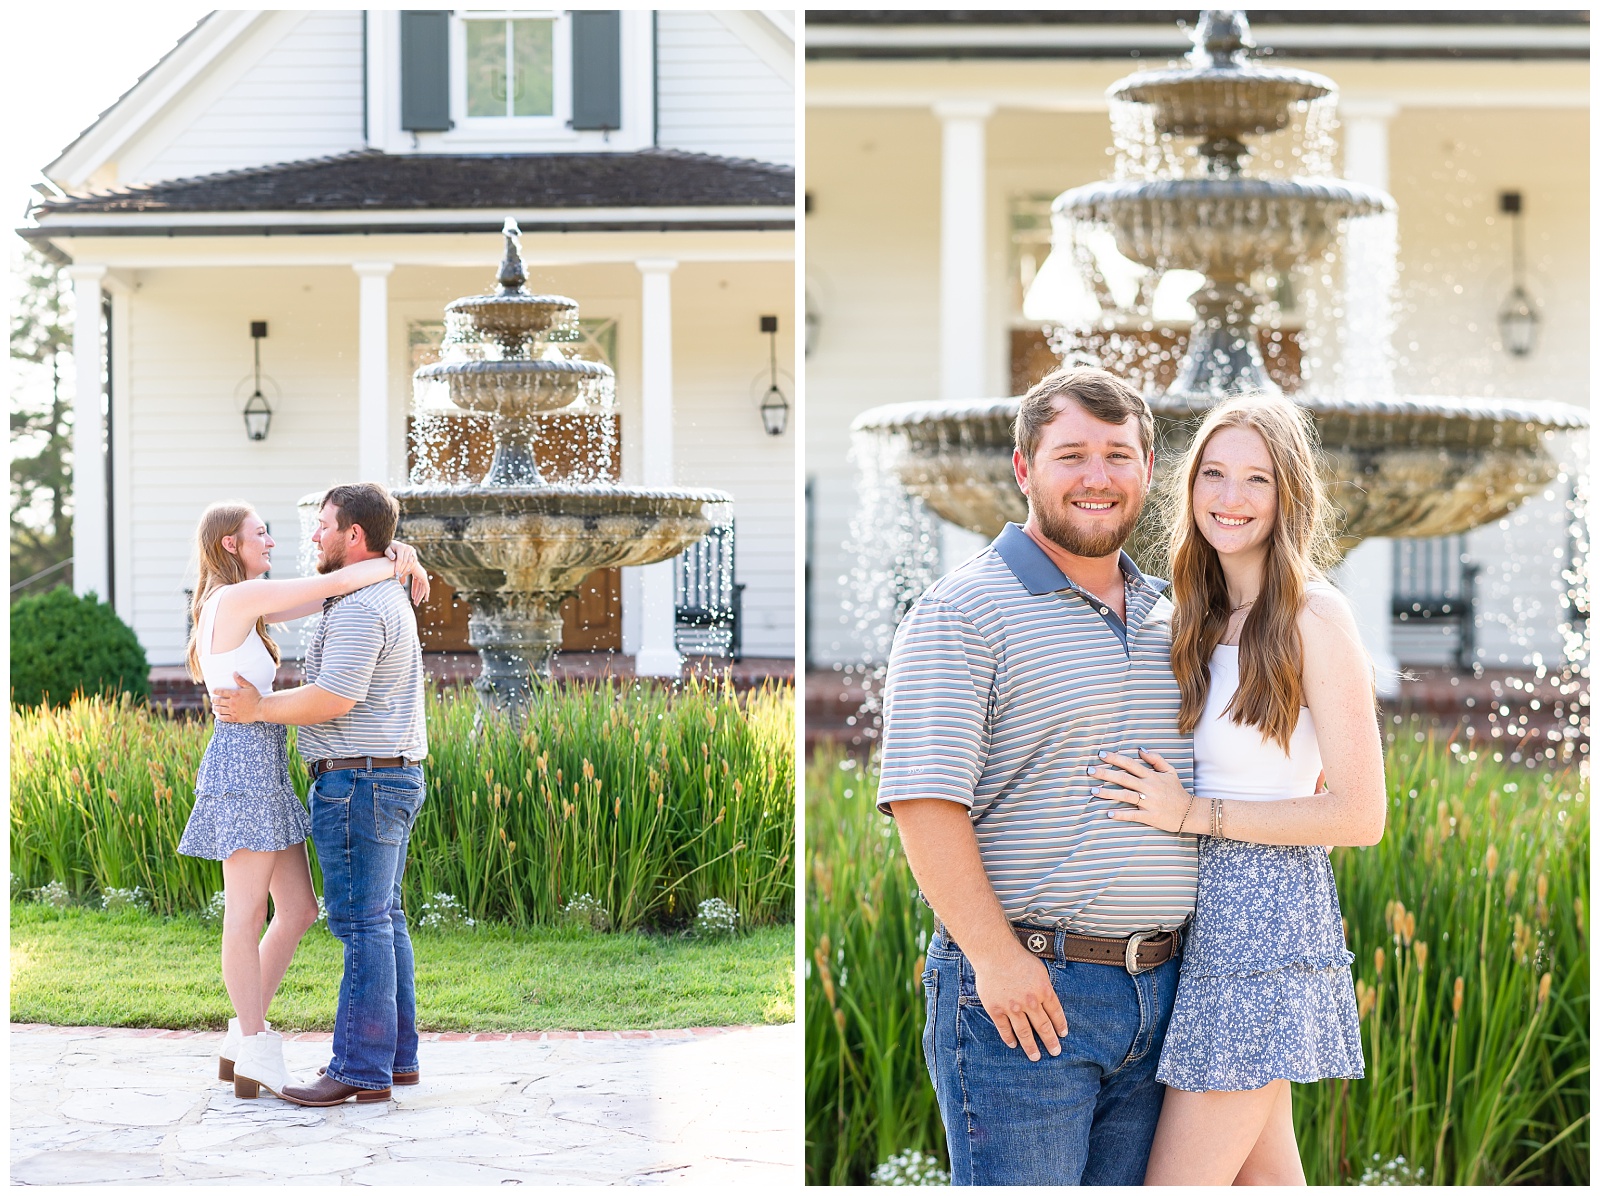 A summer proposal at Big Cedar Lodge in front of the fountain at the Garden Chapel. Images taken by Hannah Carr Photography